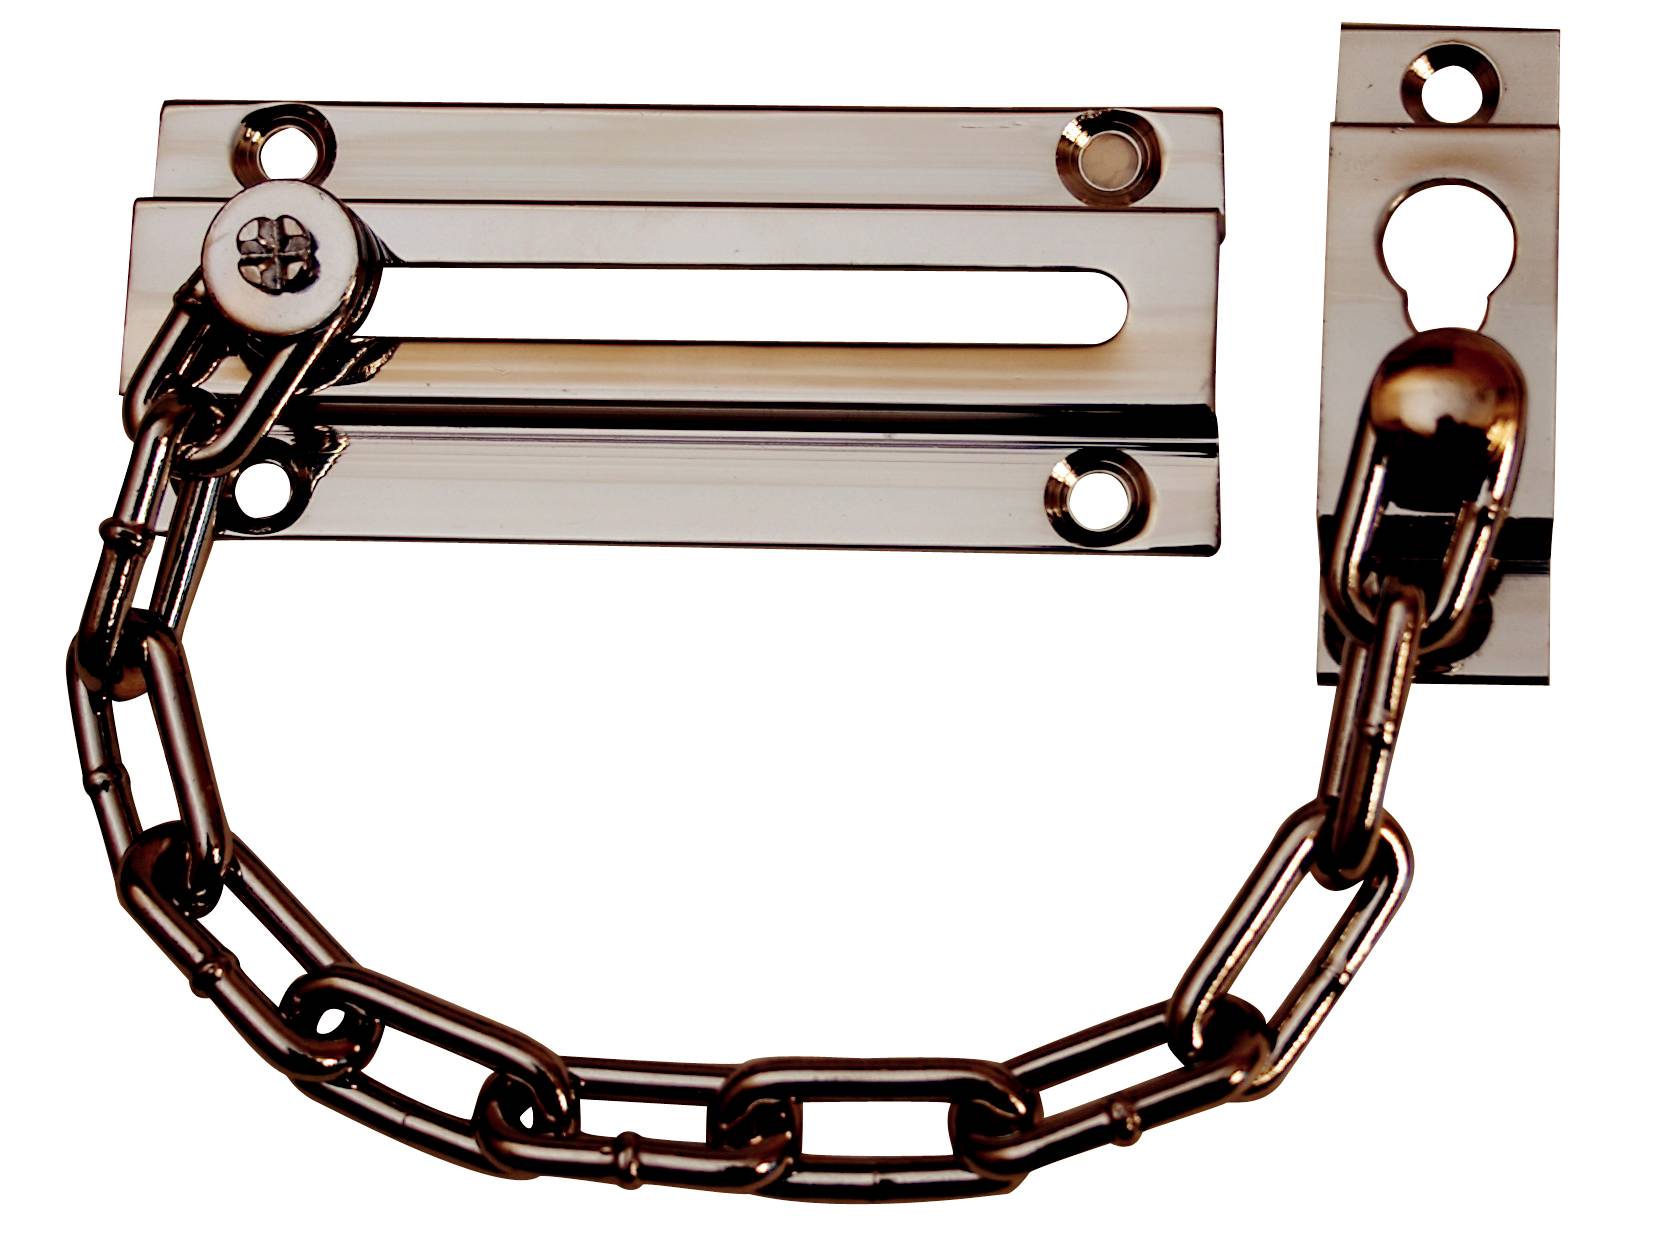 100mm Chrome Plated Door Chain